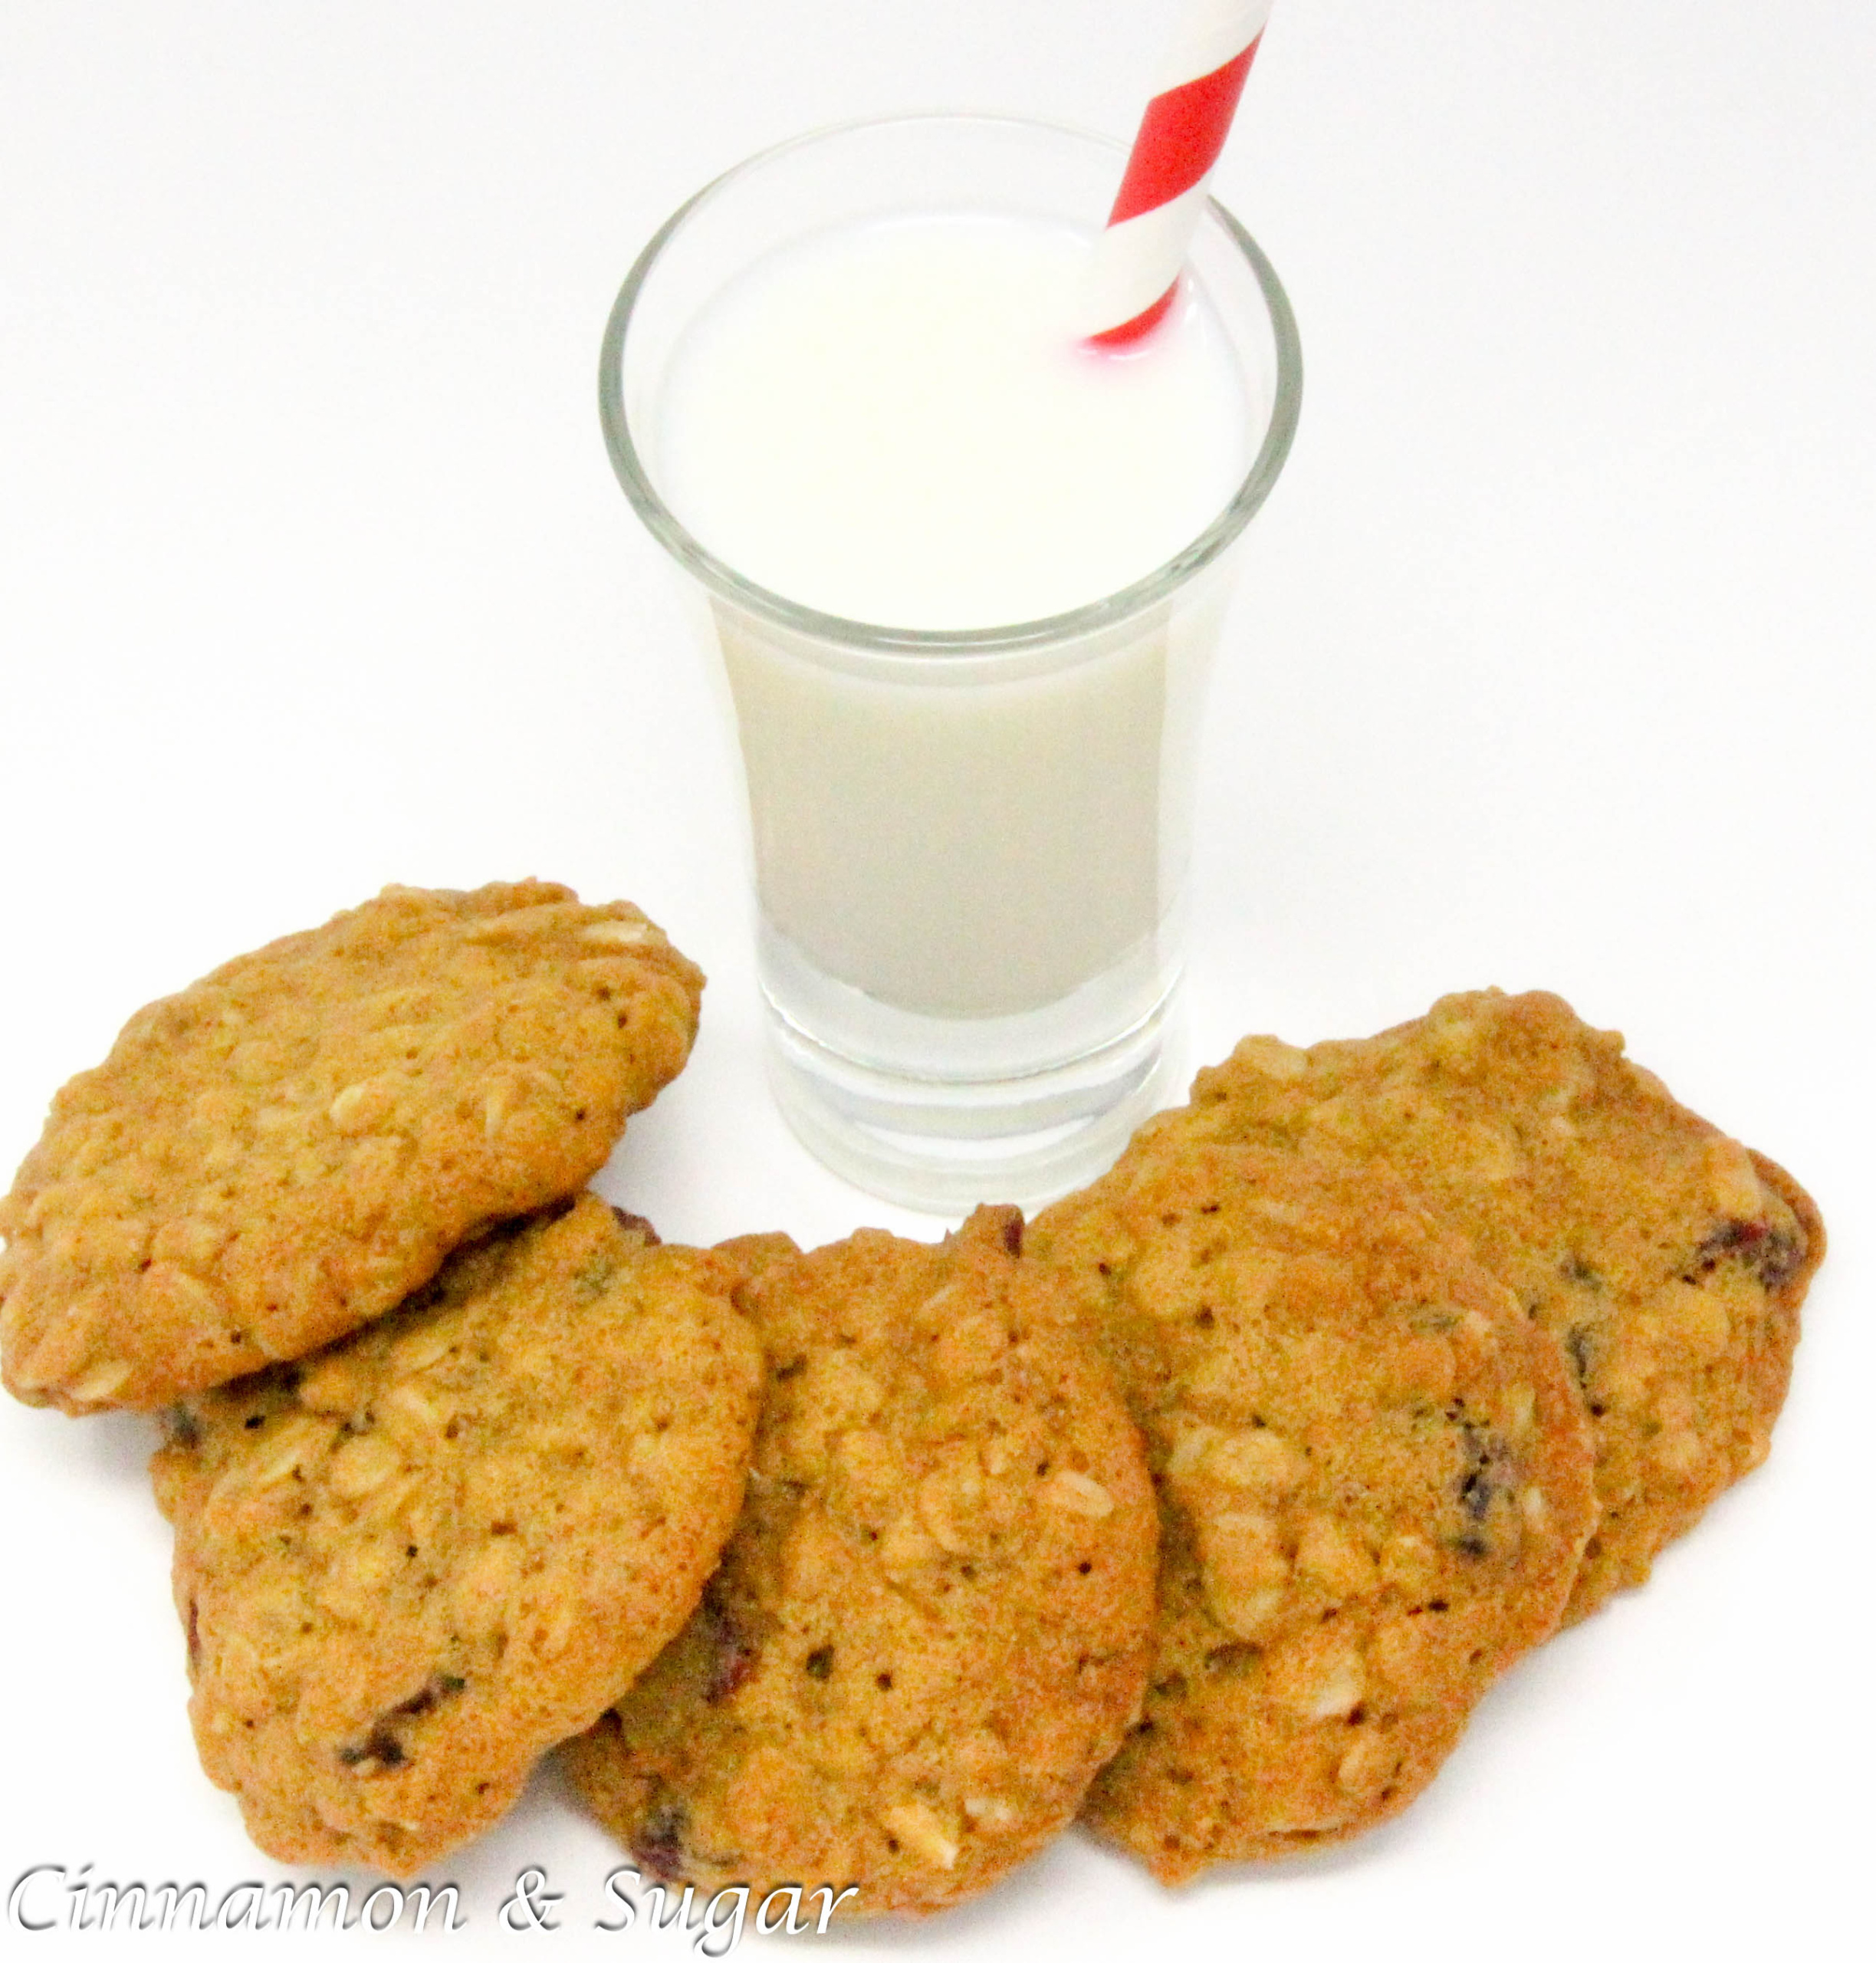 With the addition of molasses and cranberries to give the cookies an added depth of flavor and texture, Molasses Oatmeal Cookies are a yummy treat! Recipe shared with permission granted by Vicki Delany, author of A CURIOUS INCIDENT.